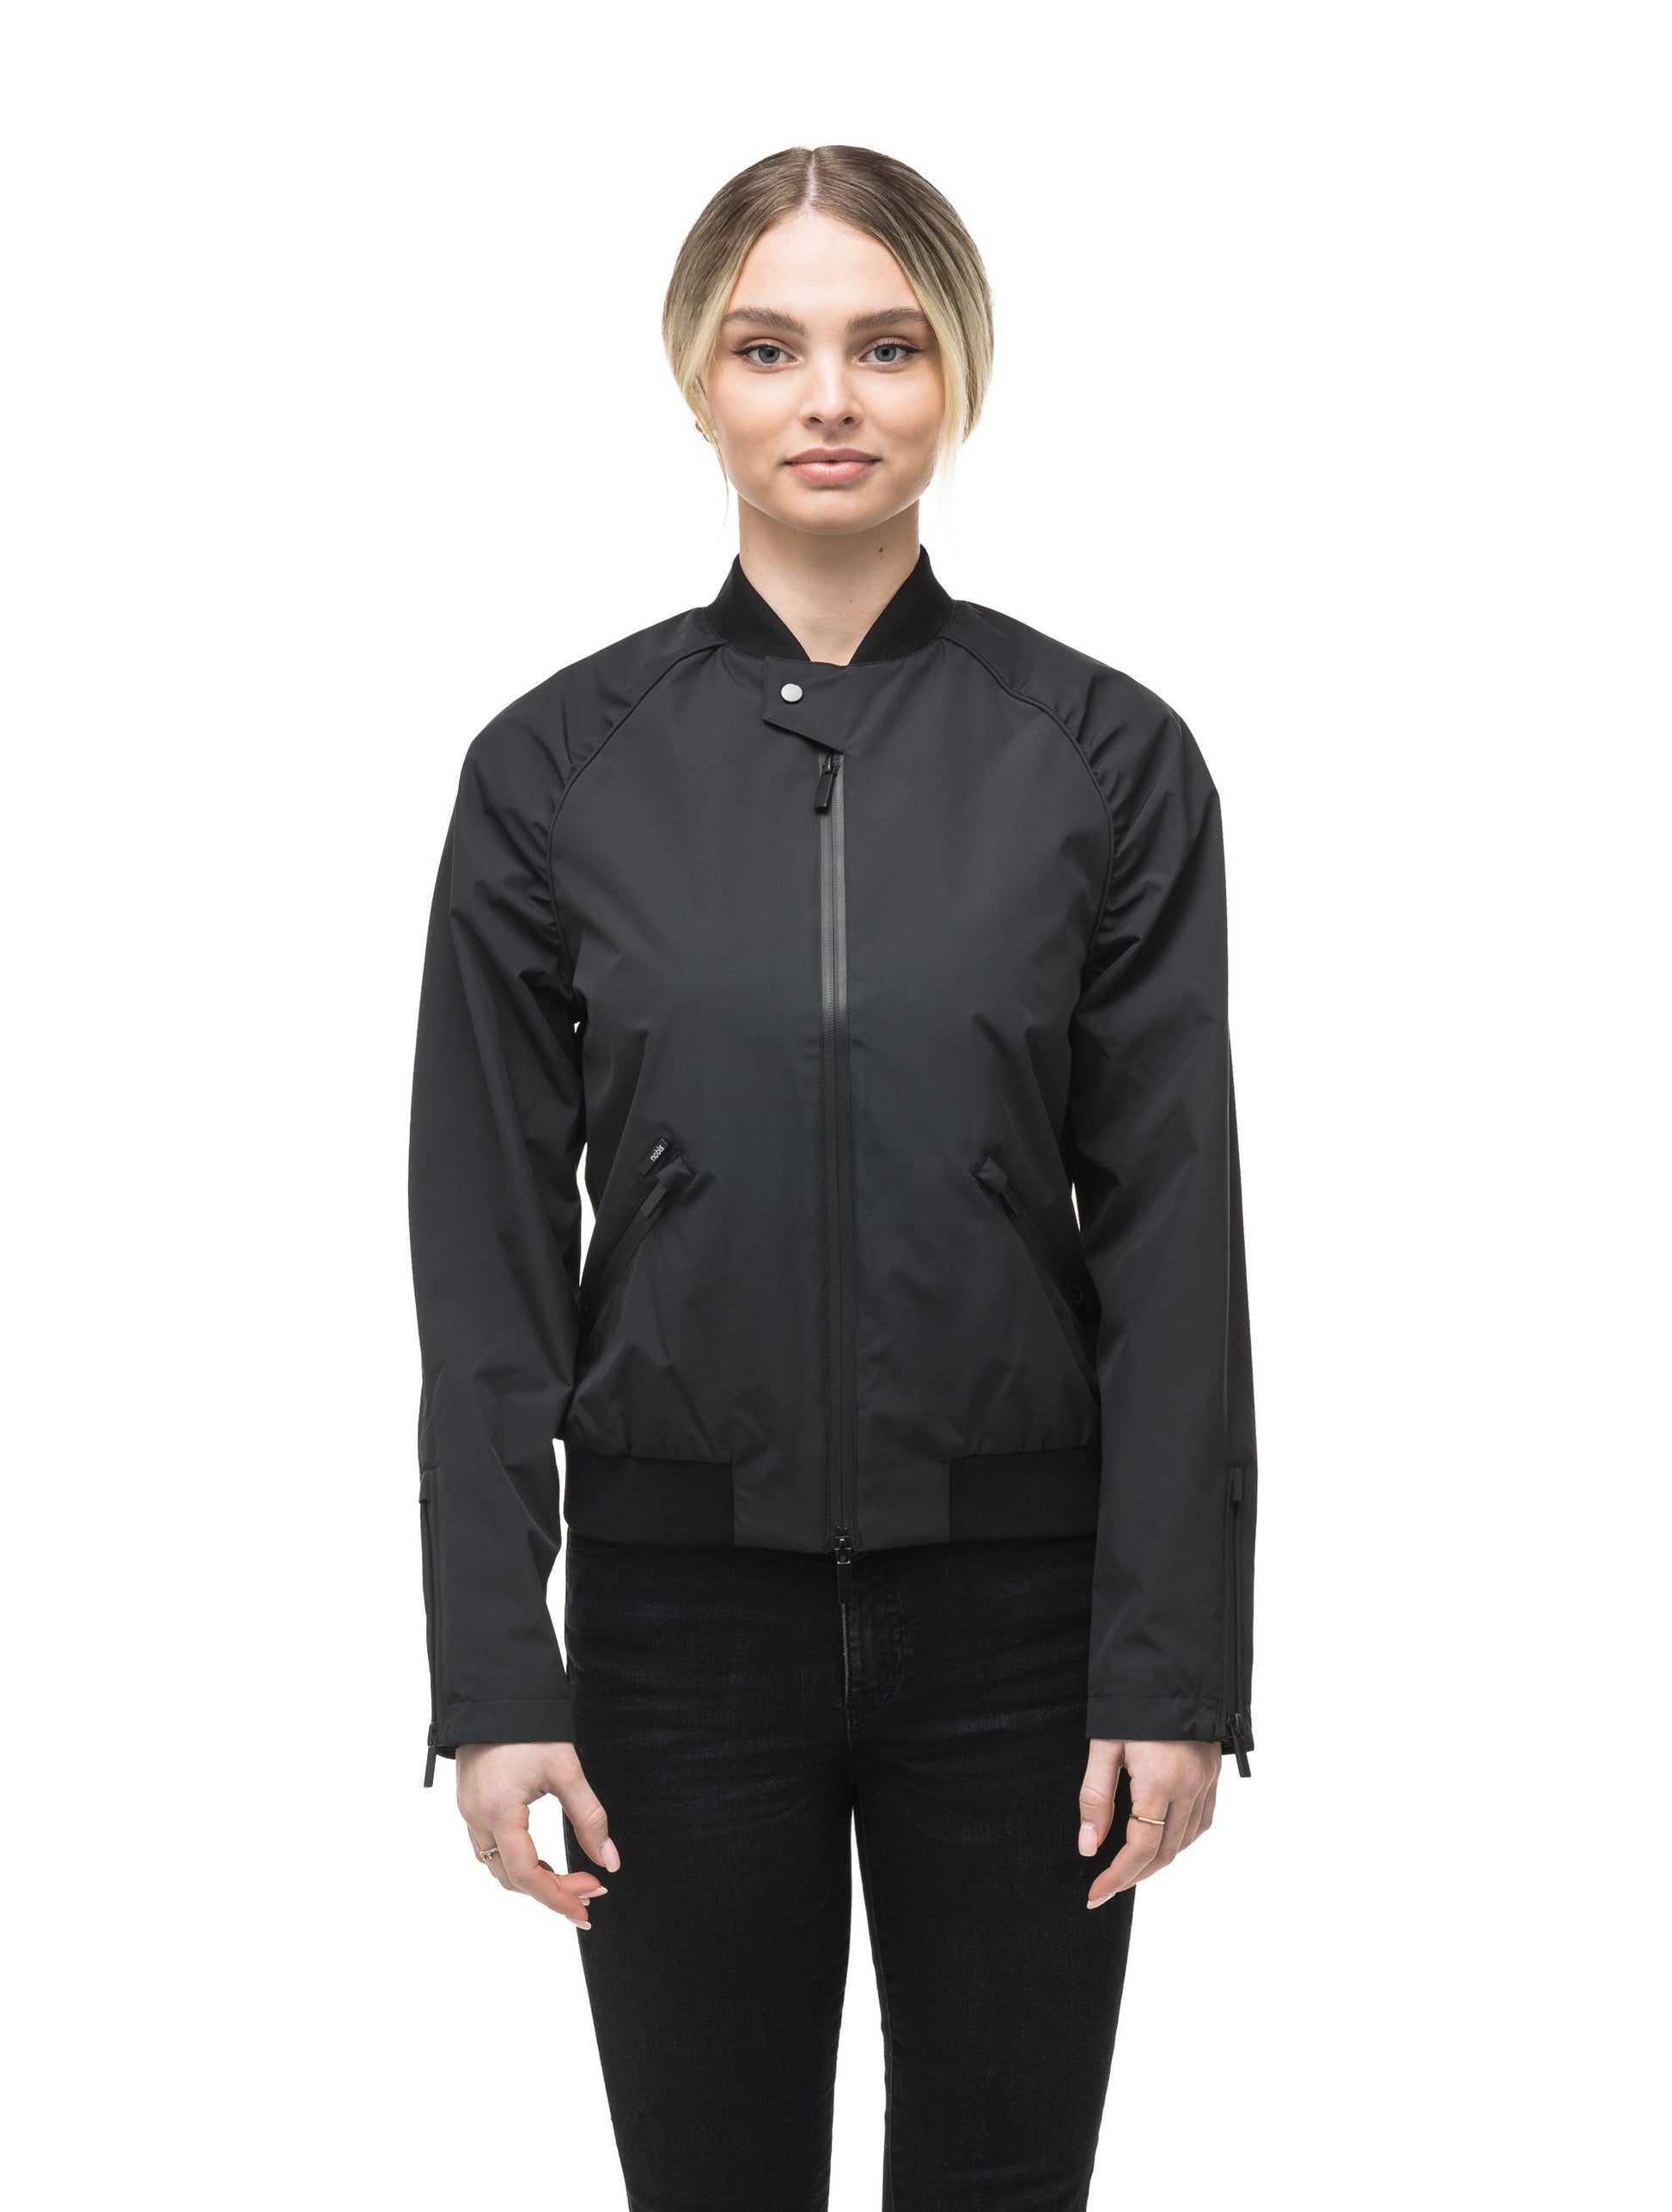 Womens classic bomber jacket called Phoebe in Black